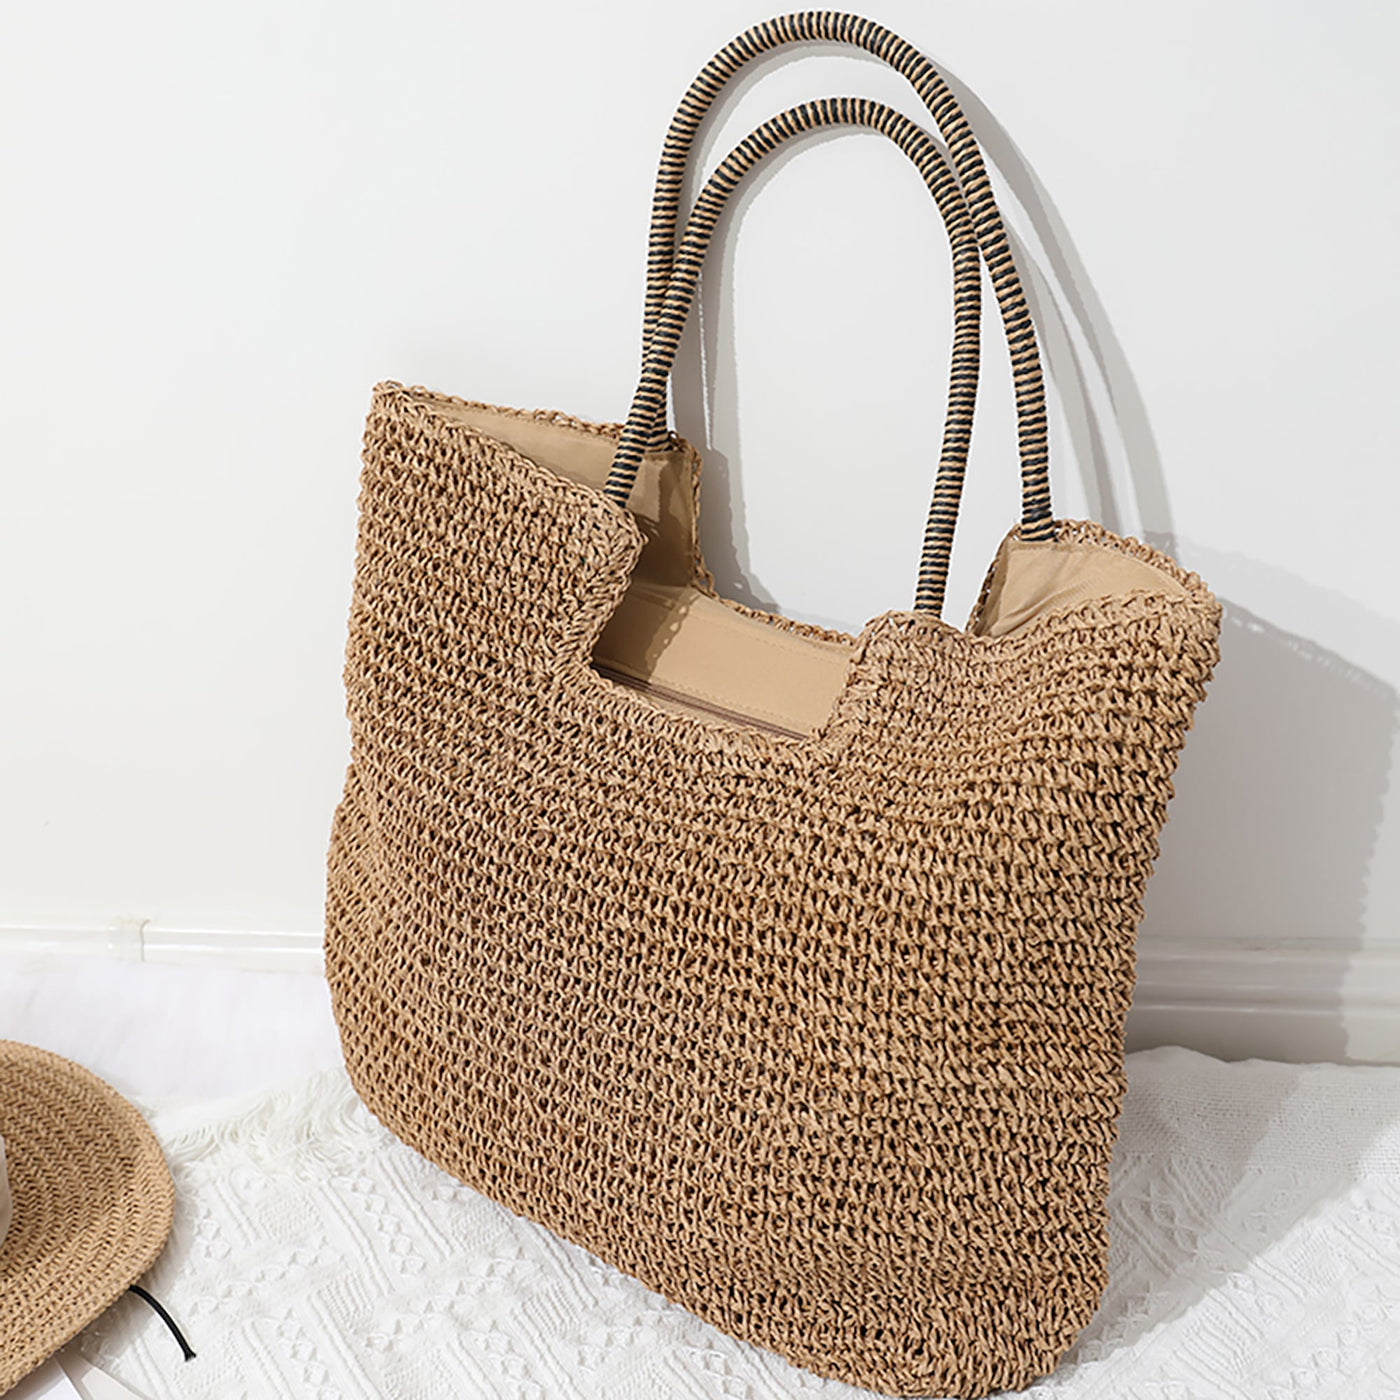 Basket Straw Tote Bags for Women Rattan Handmade Beach Hand Bags Ladies  Bamboo Woven Holiday Shoulder Bag